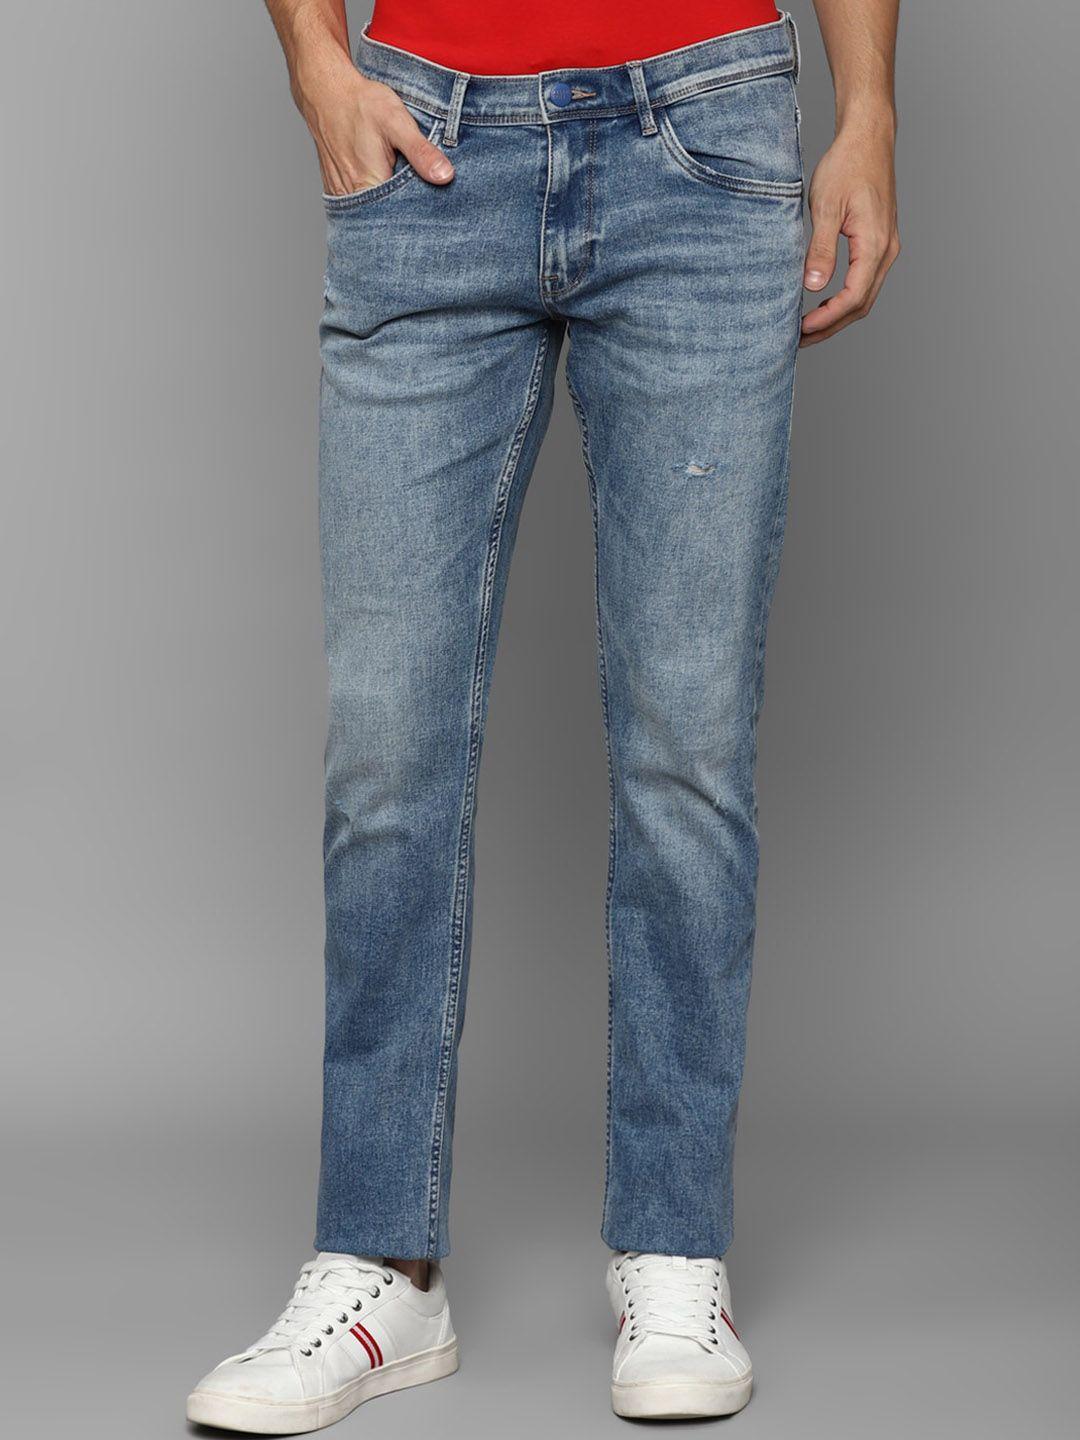 allen-solly-men-slim-fit-mid-rise-low-distress-heavy-fade-stretchable-jeans